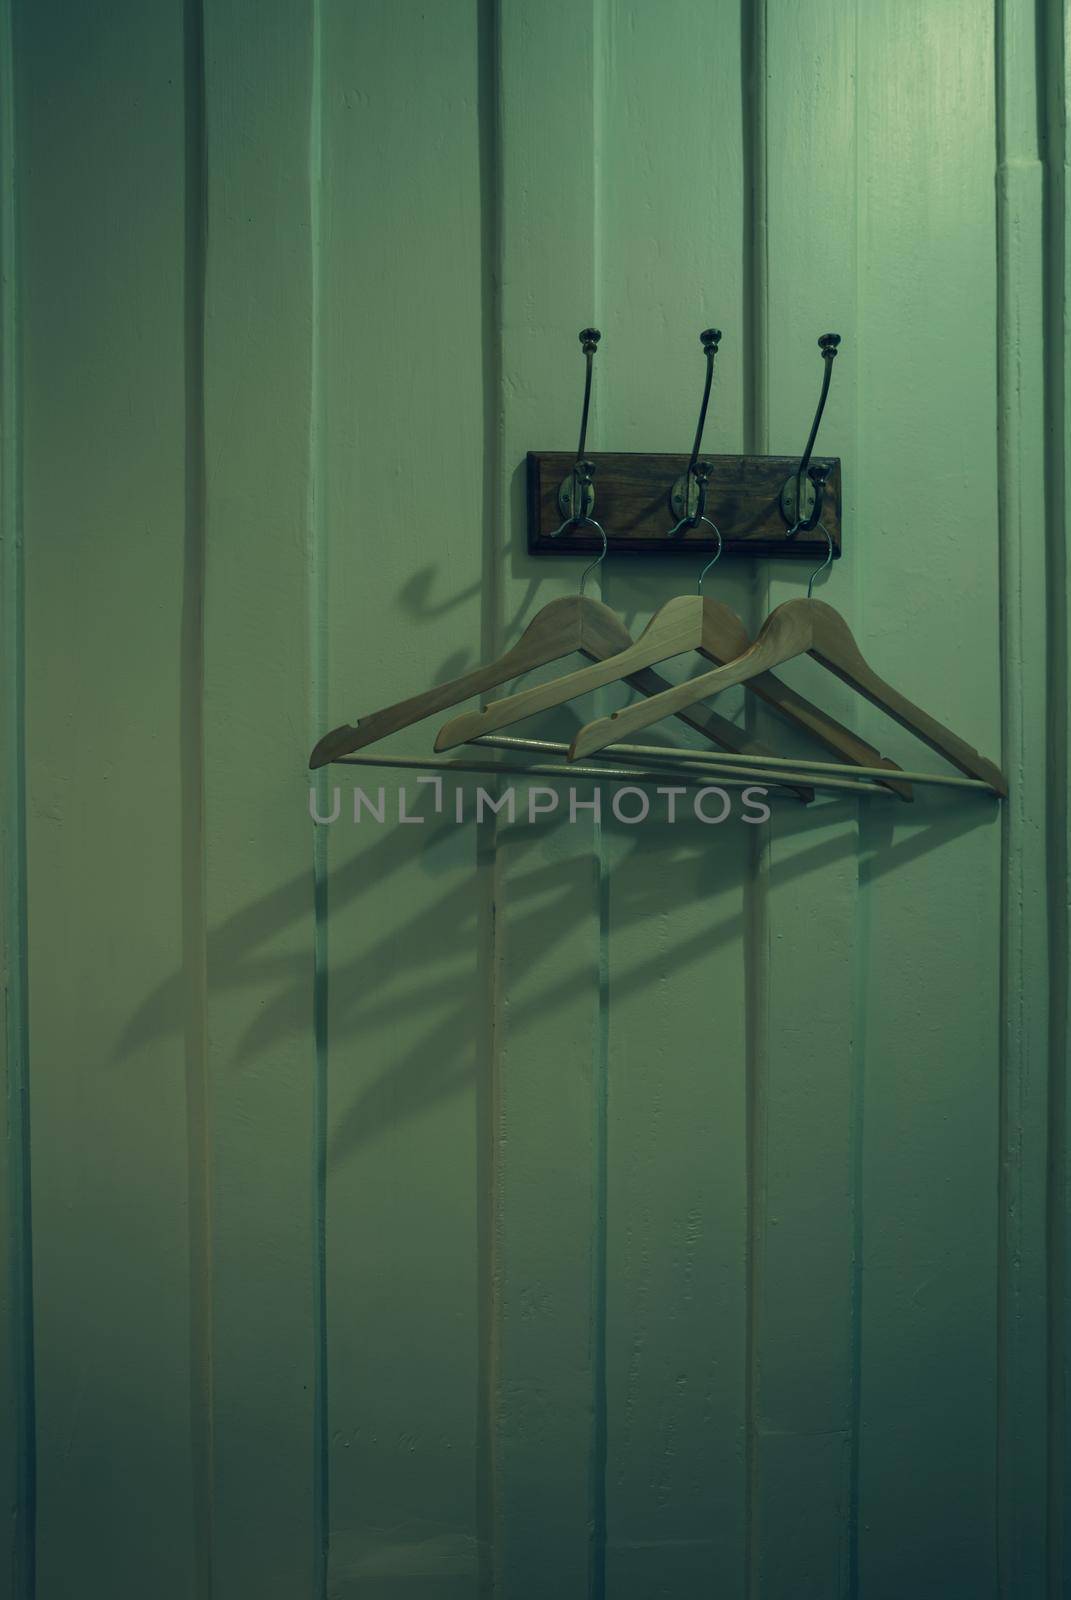 Brown wooden cloth hanger with shadow hanging on metal hook on wooden wall background. Empty coat hanger in white vintage room. Hook install on wood wall in dark room. Rustic style fitting room.